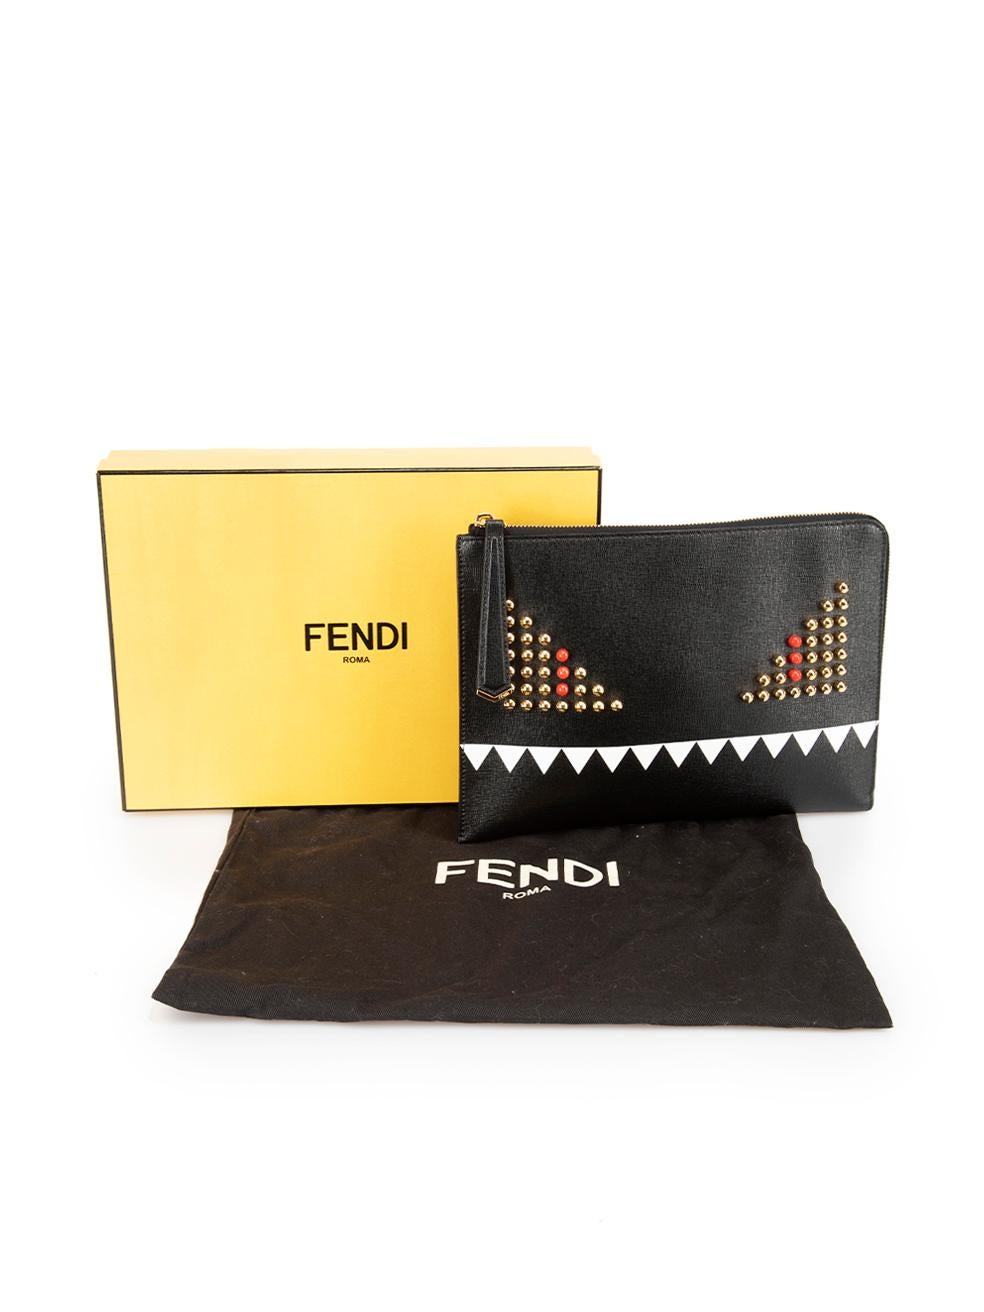 Fendi Women's Black Leather Monster Stud Small Pouch For Sale 4